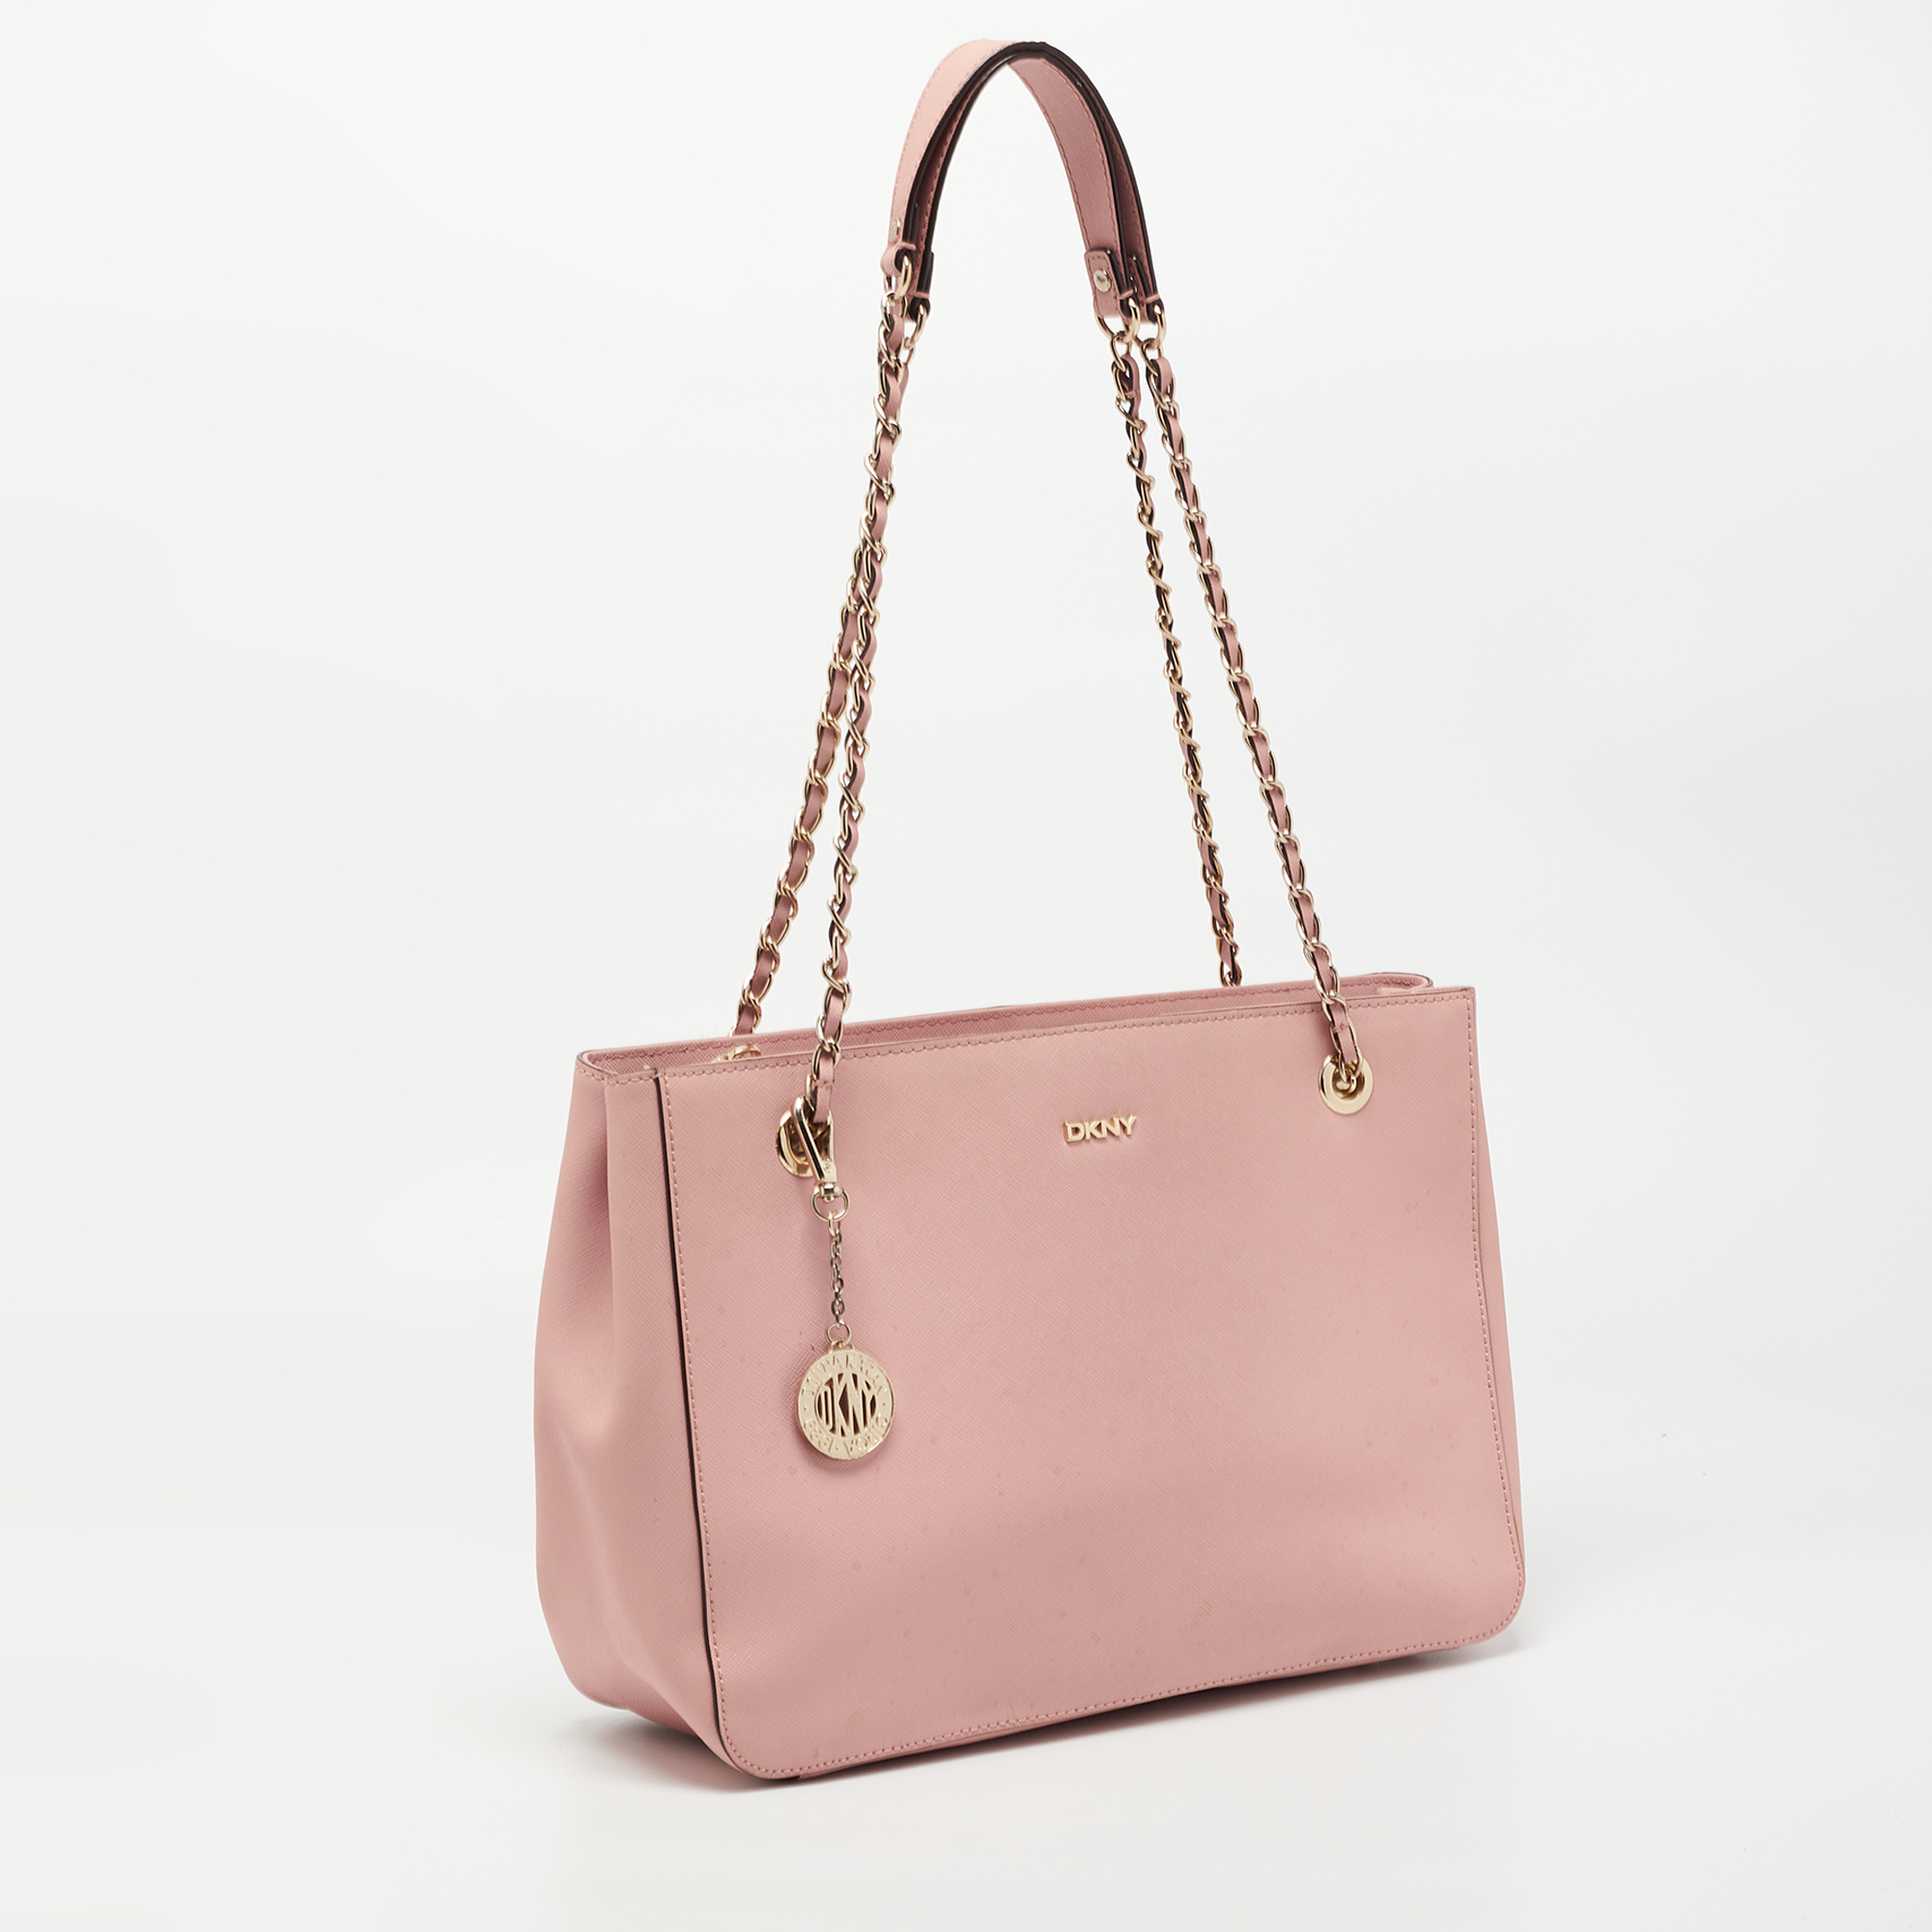 DKNY Light Pink Saffiano Leather Top Zip Tote